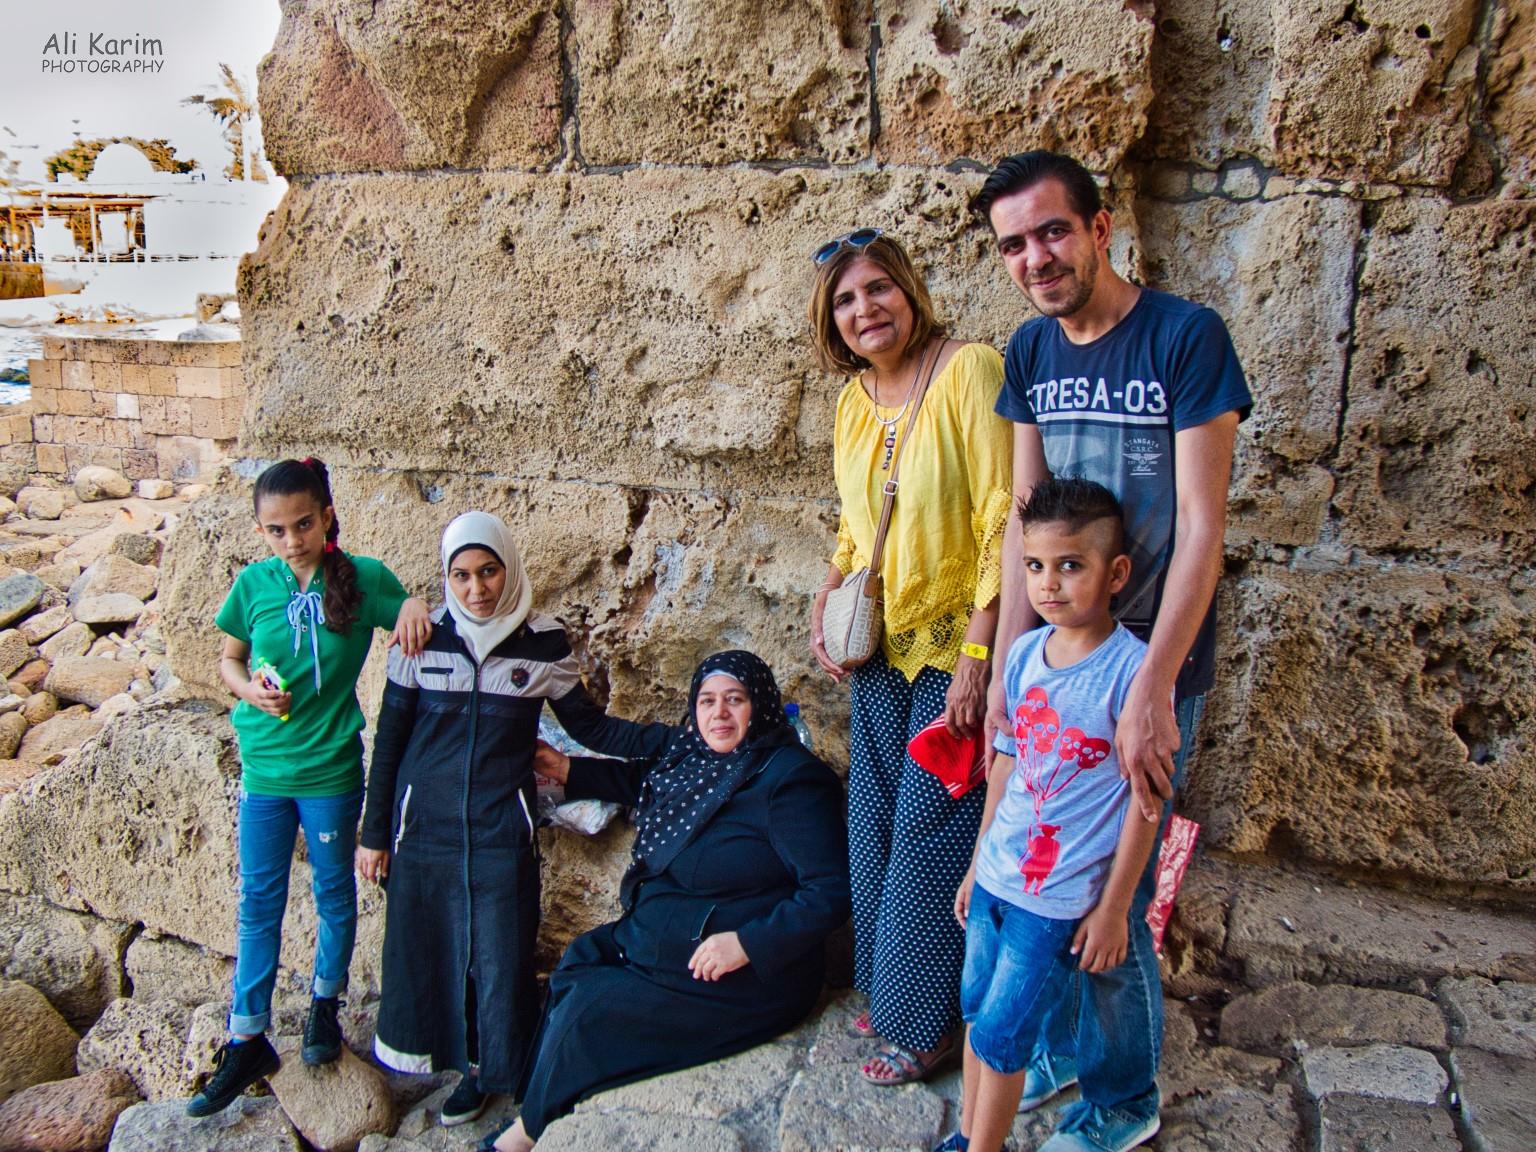 Sidon and Tyre Syrian family (mother, son, daughter-in-law and kids) who befriended us and shared their snacks with us